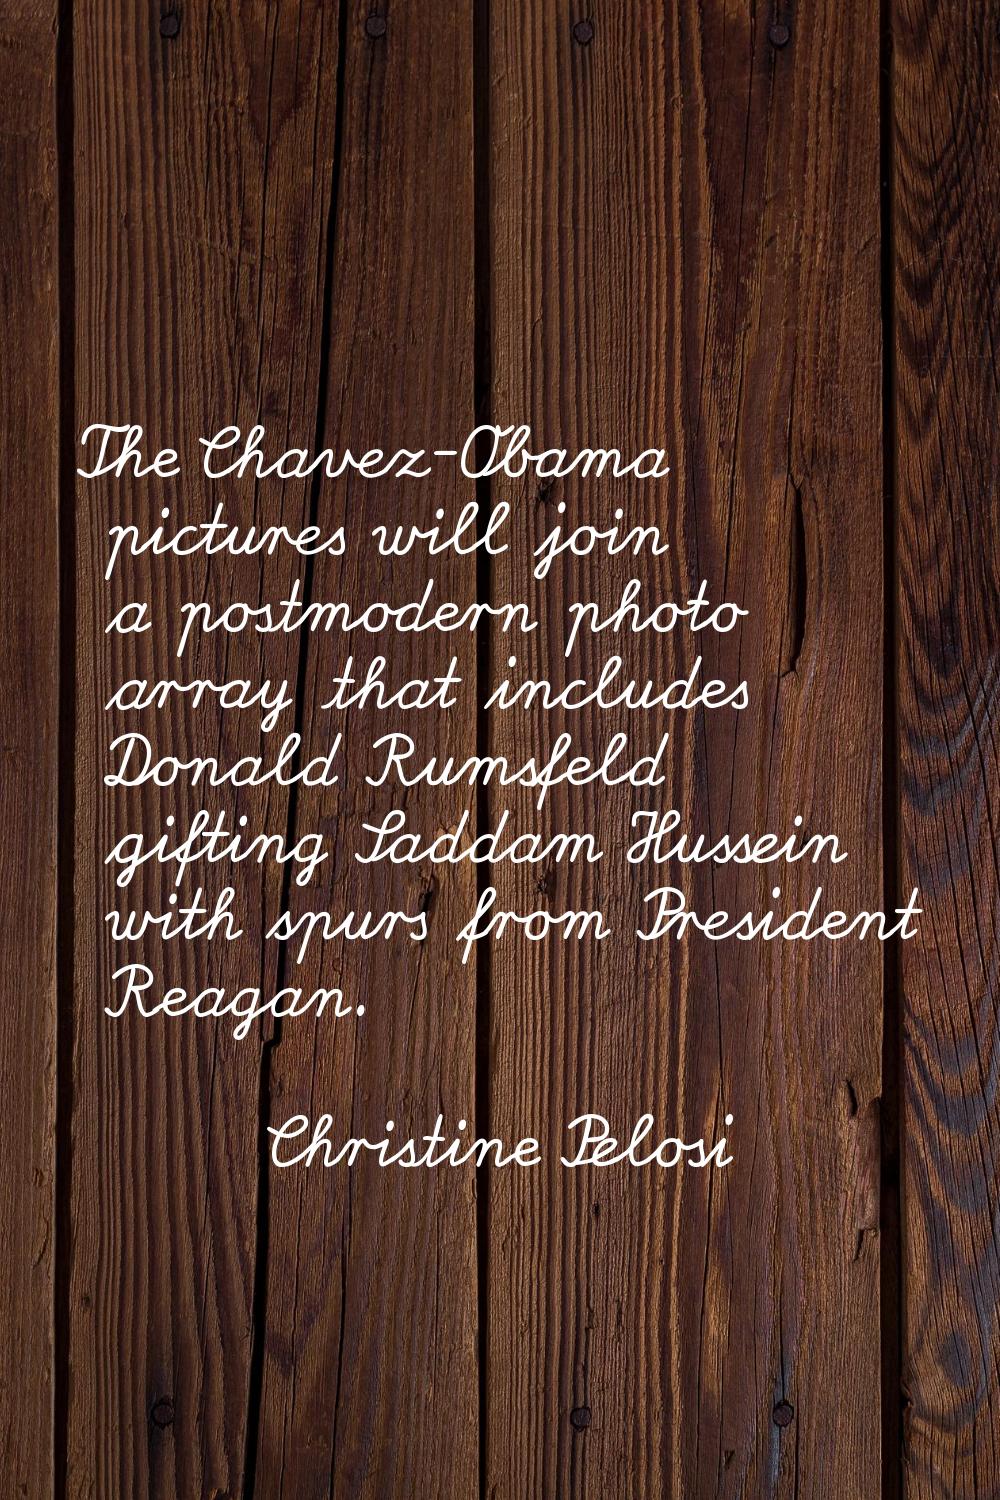 The Chavez-Obama pictures will join a postmodern photo array that includes Donald Rumsfeld gifting 